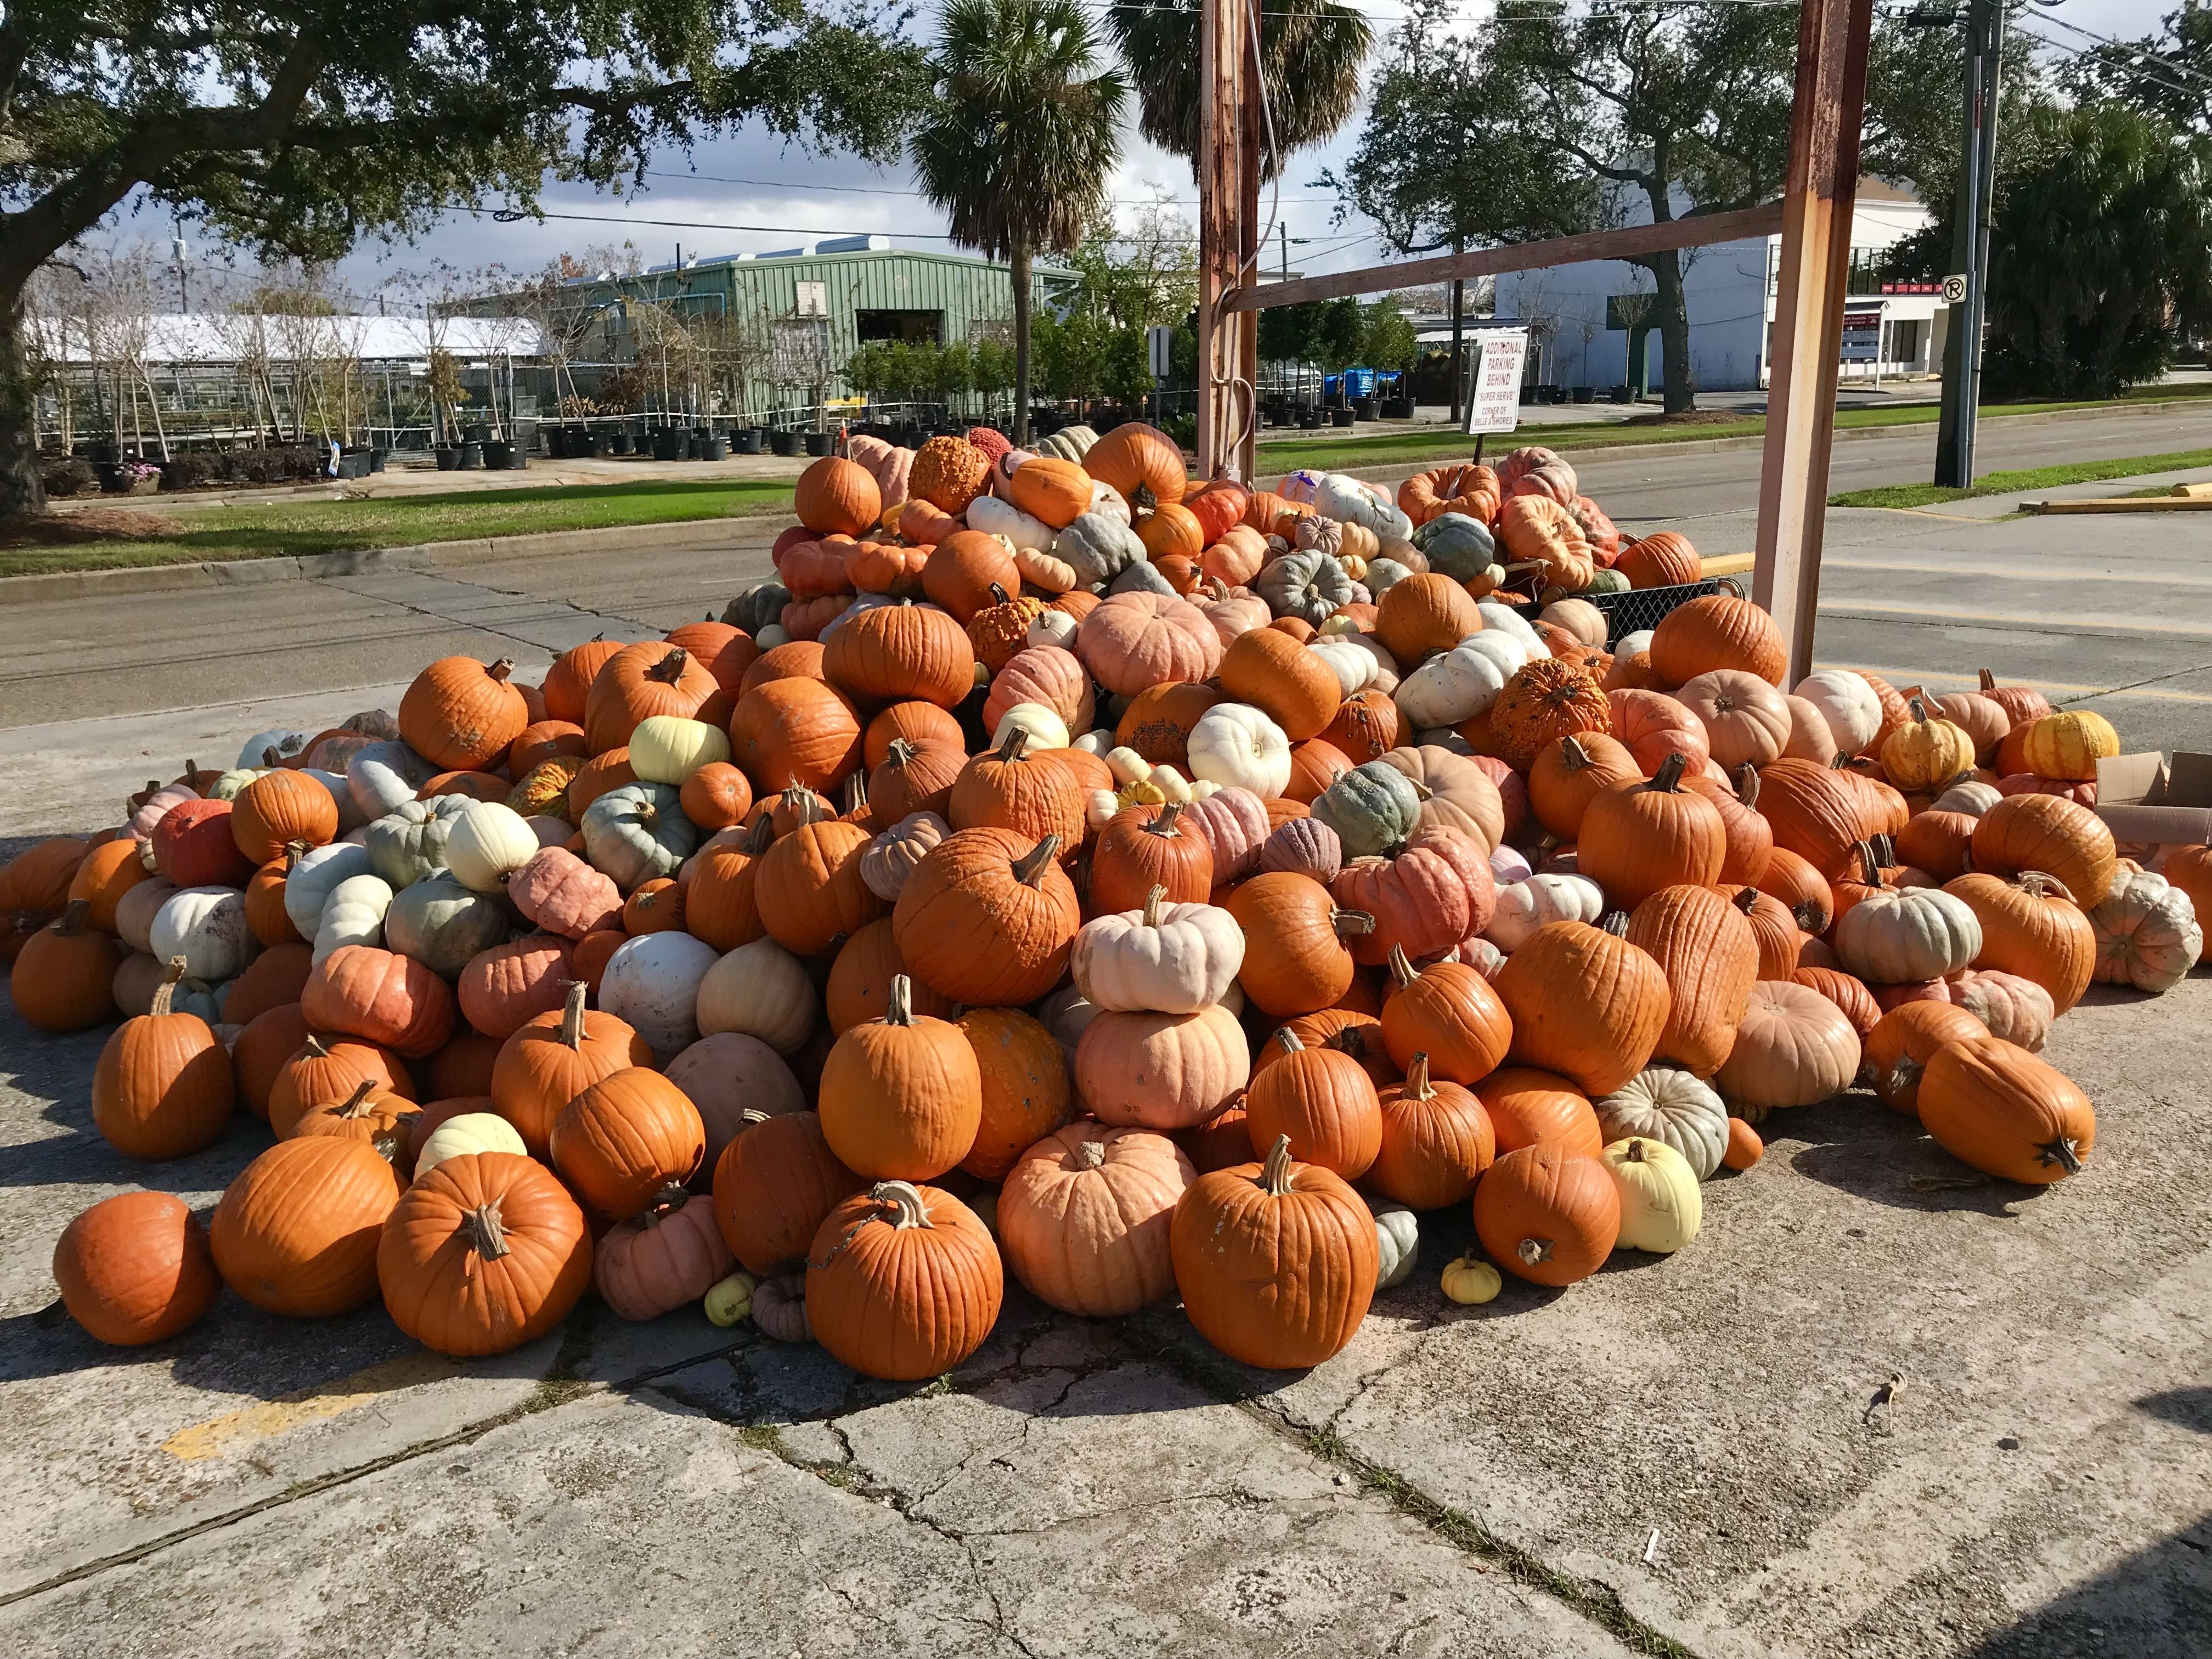 Photo shows a pile of pumpkins in the parking lot